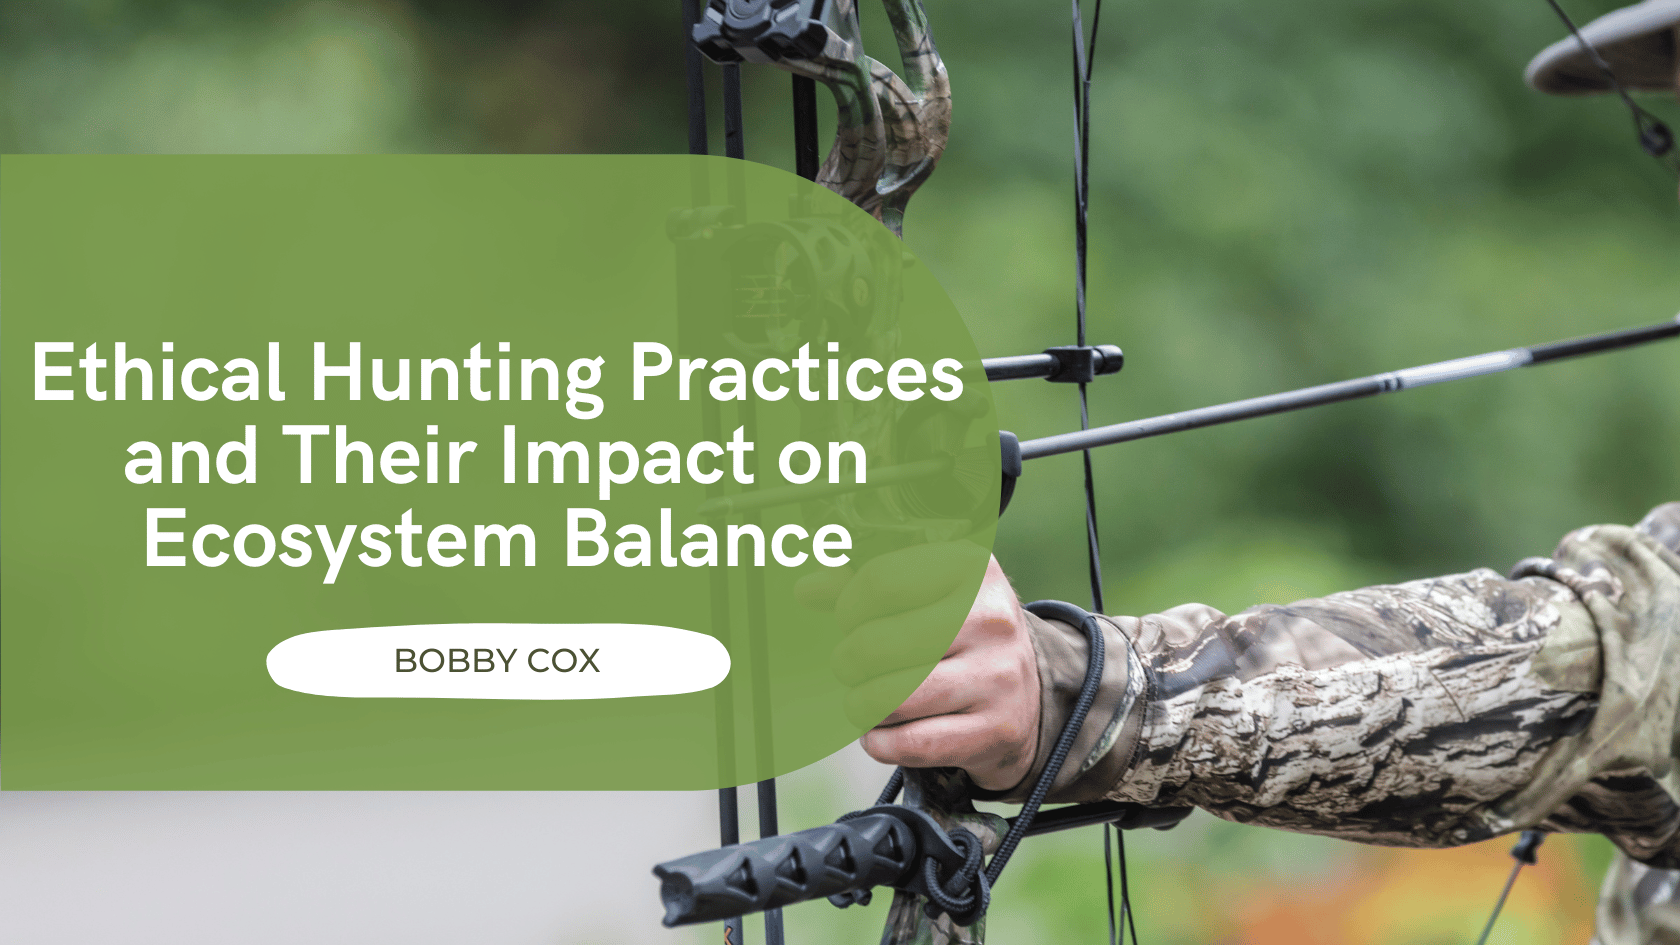 Ethical Hunting Practices and Their Impact on Ecosystem Balance